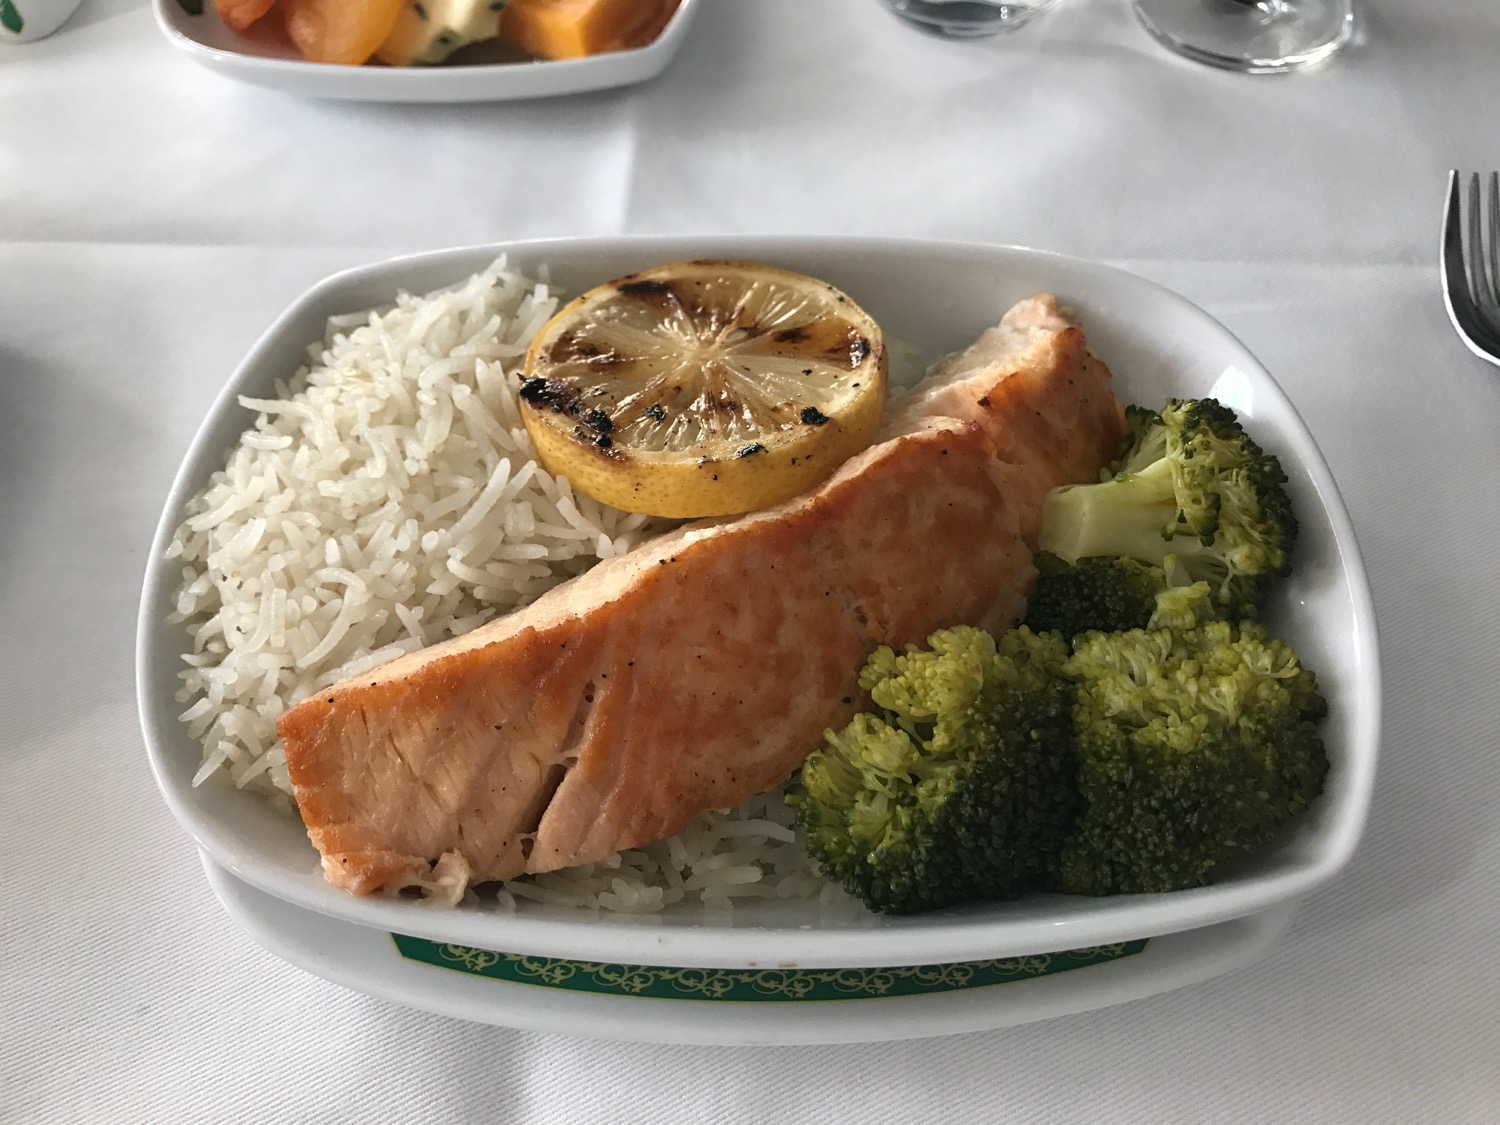 a plate of food with a lemon slice and rice